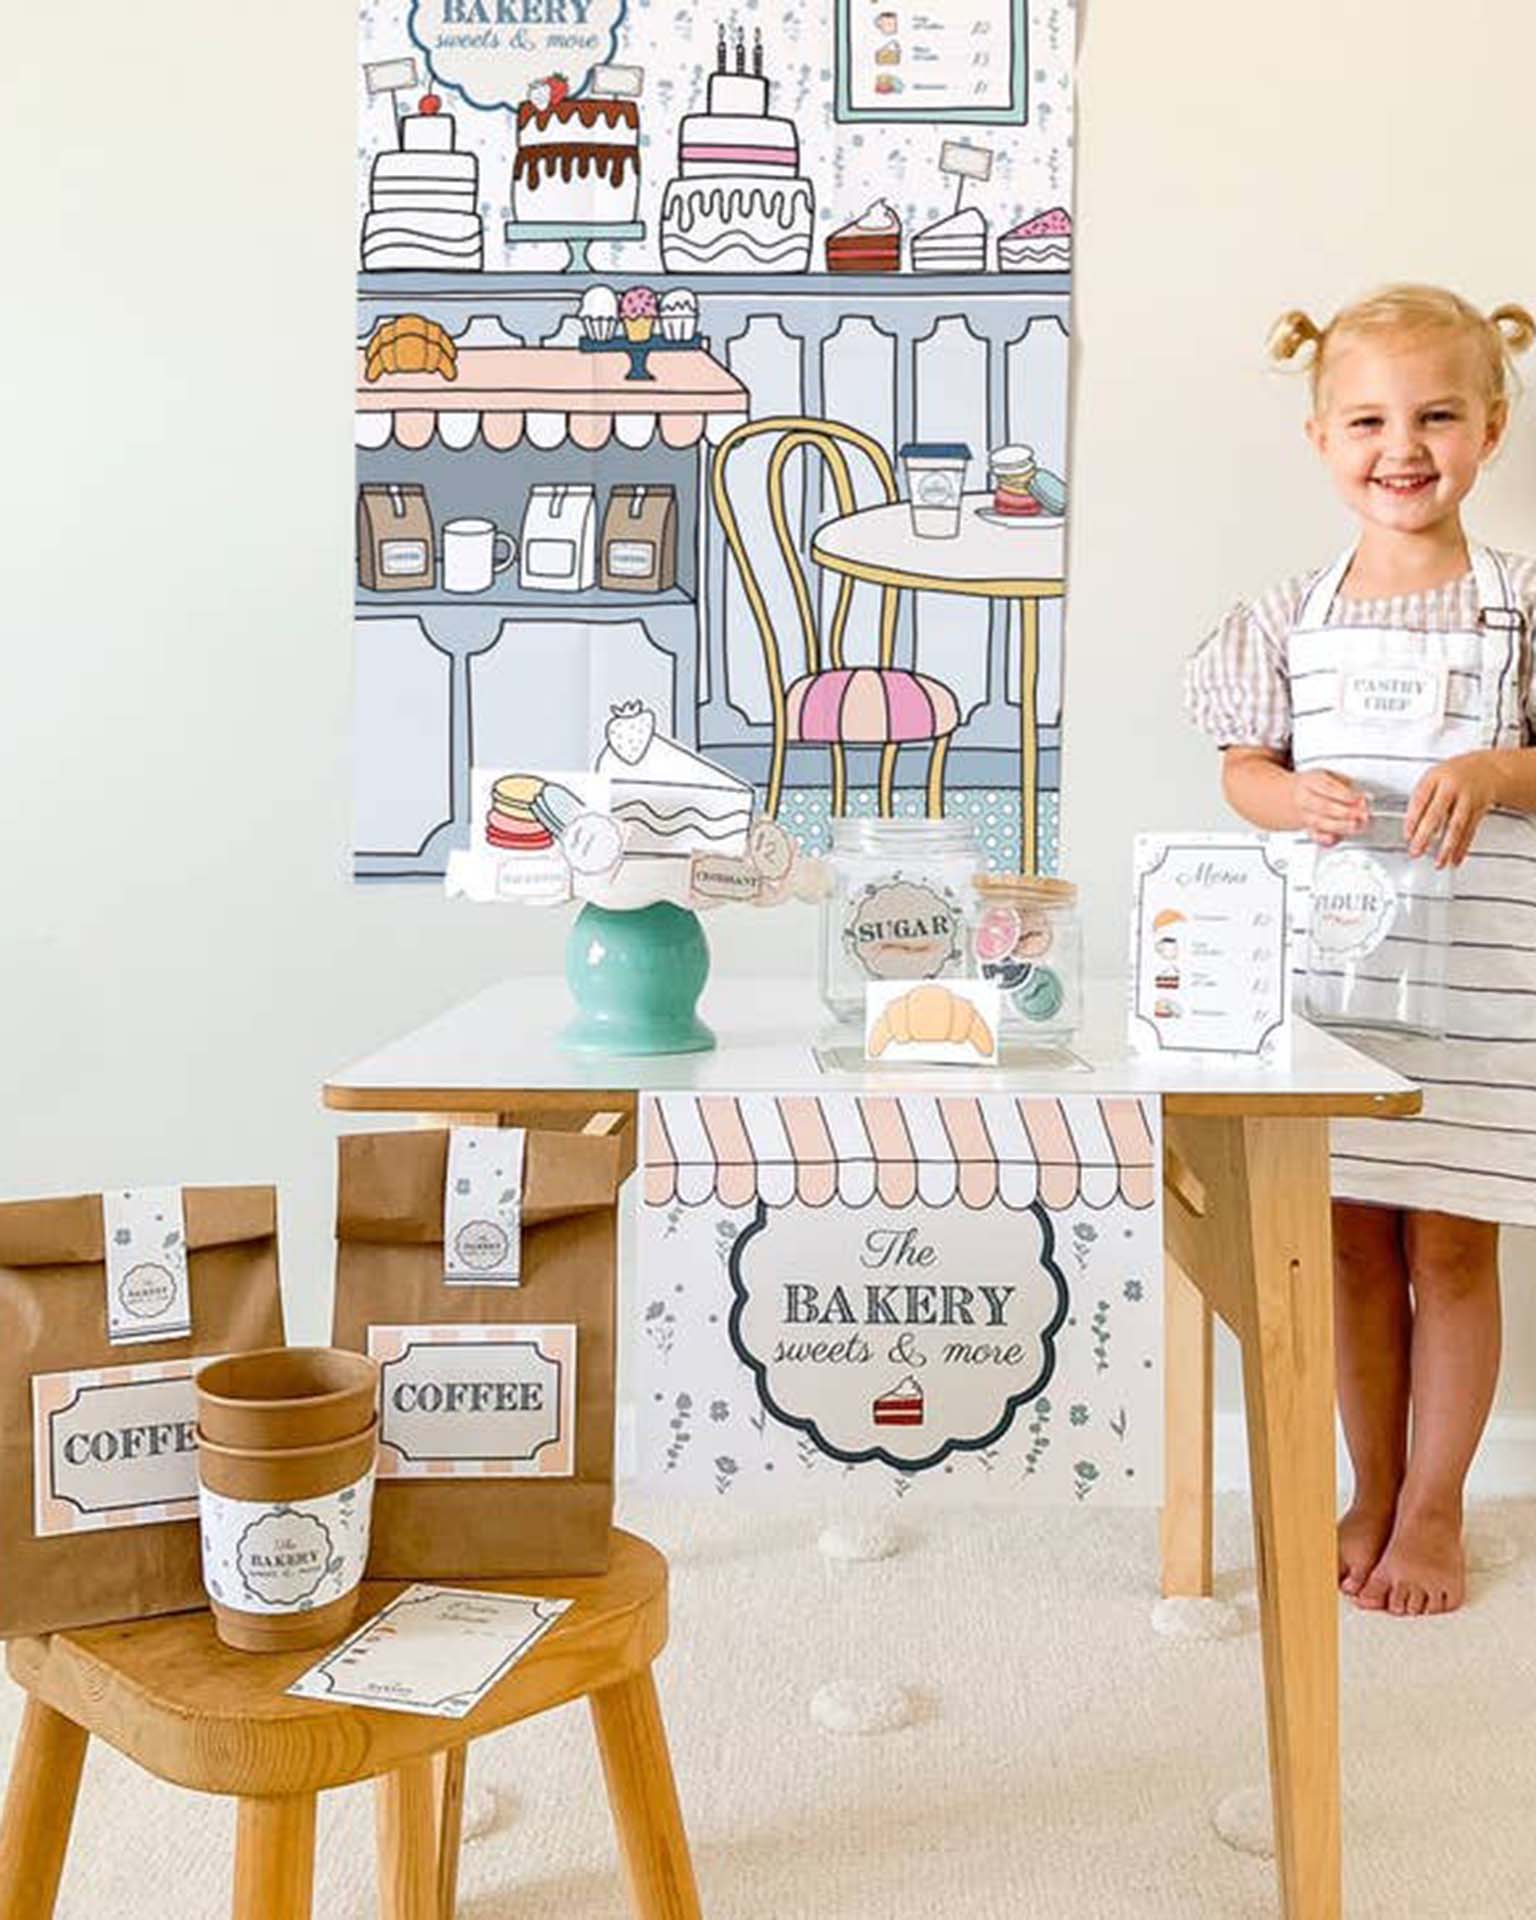 Little magic playbook Paper + Party bakery play kit